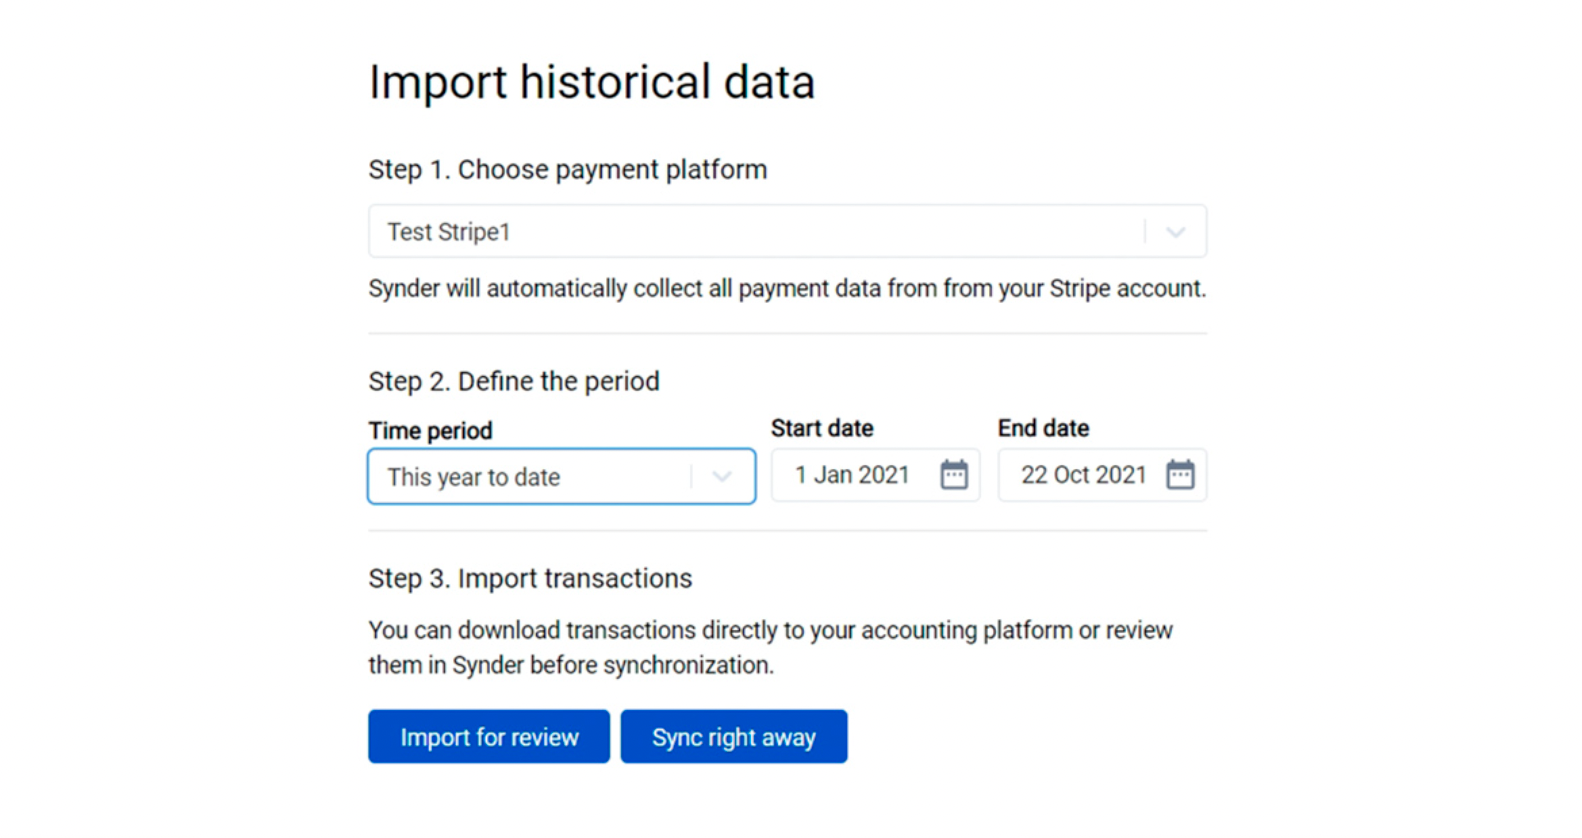 Importing historical data in Synder